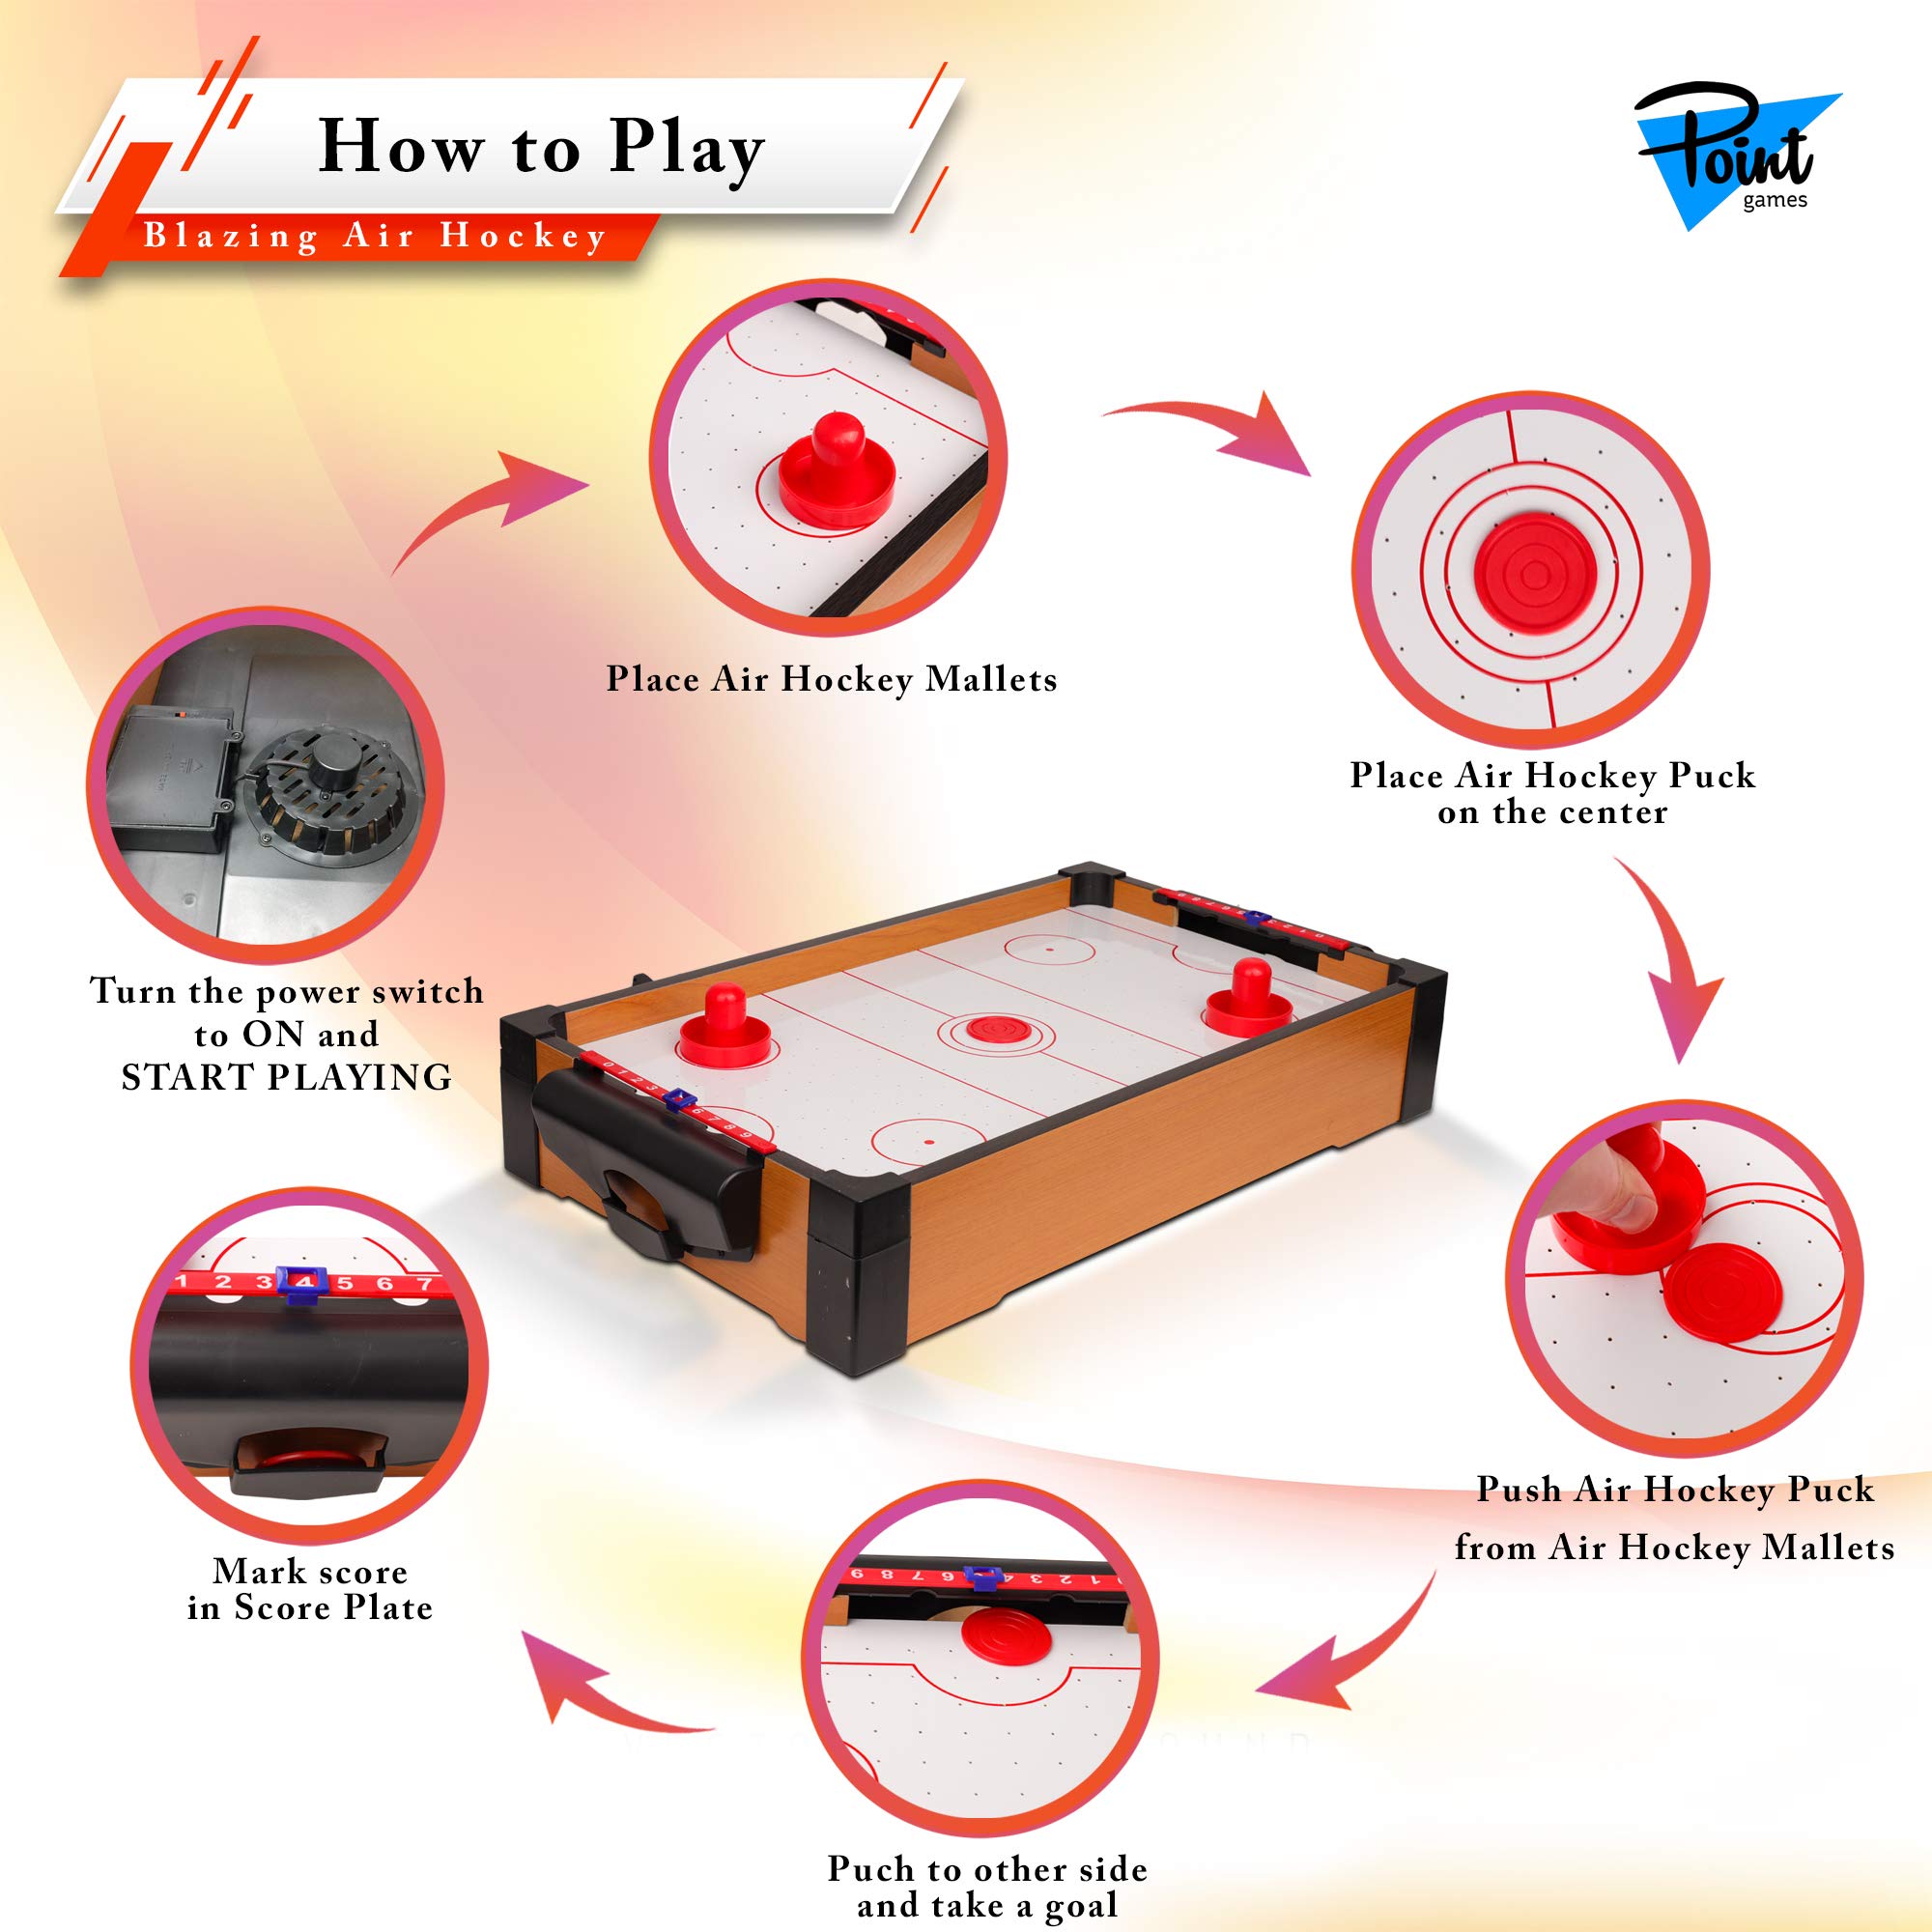 Point Games Mini Air Hockey Table for Kids - Hockey Table Game - Arcade & Table Games - Air Hockey Pucks and Paddles - Portable Sport Hockey for Boys and Girls - image 5 of 6